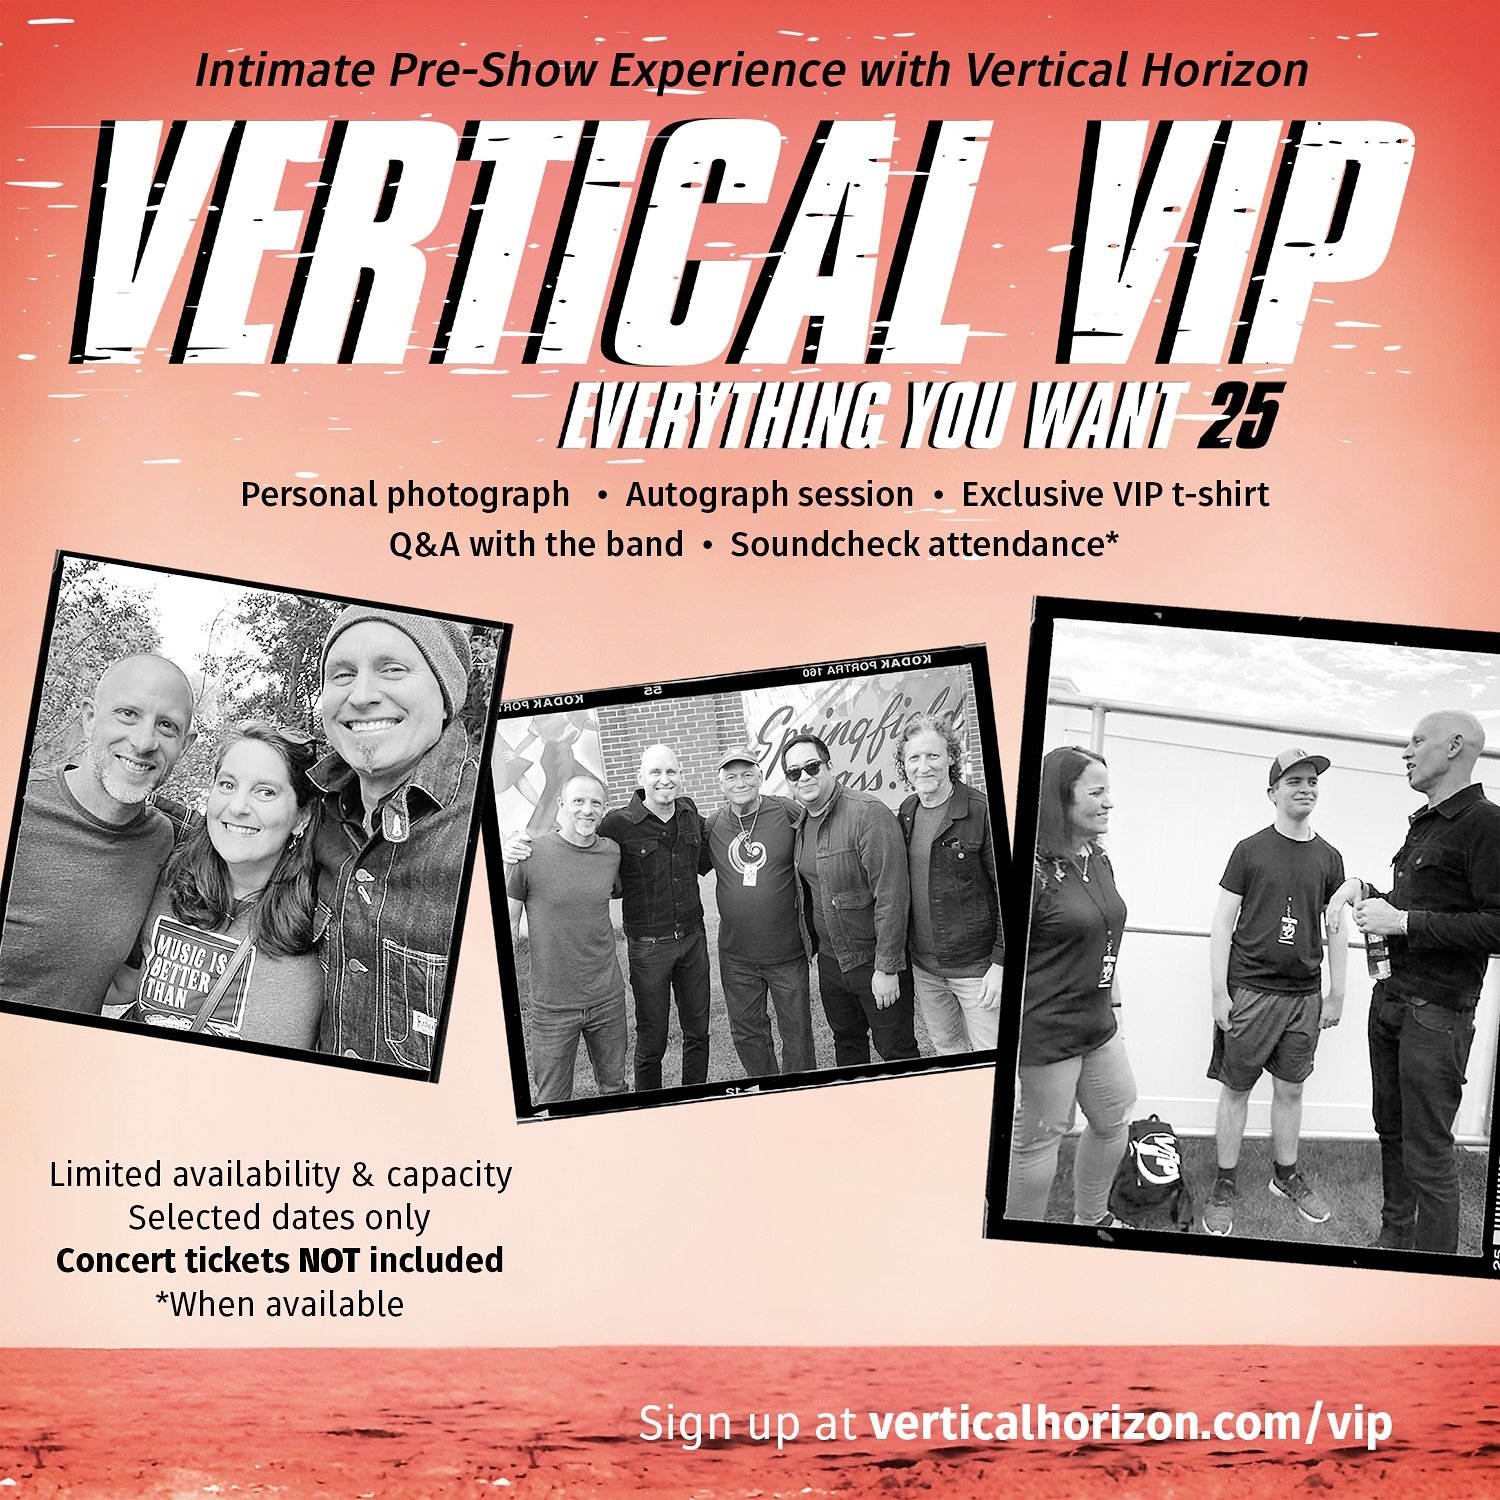 Vertical VIP makes its return for 2024! One of our favorite aspects of being on the road touring is personally engaging with our fans. Experience an intimate pre-show event meeting the members of Vertical Horizon, checking out soundcheck and how the 